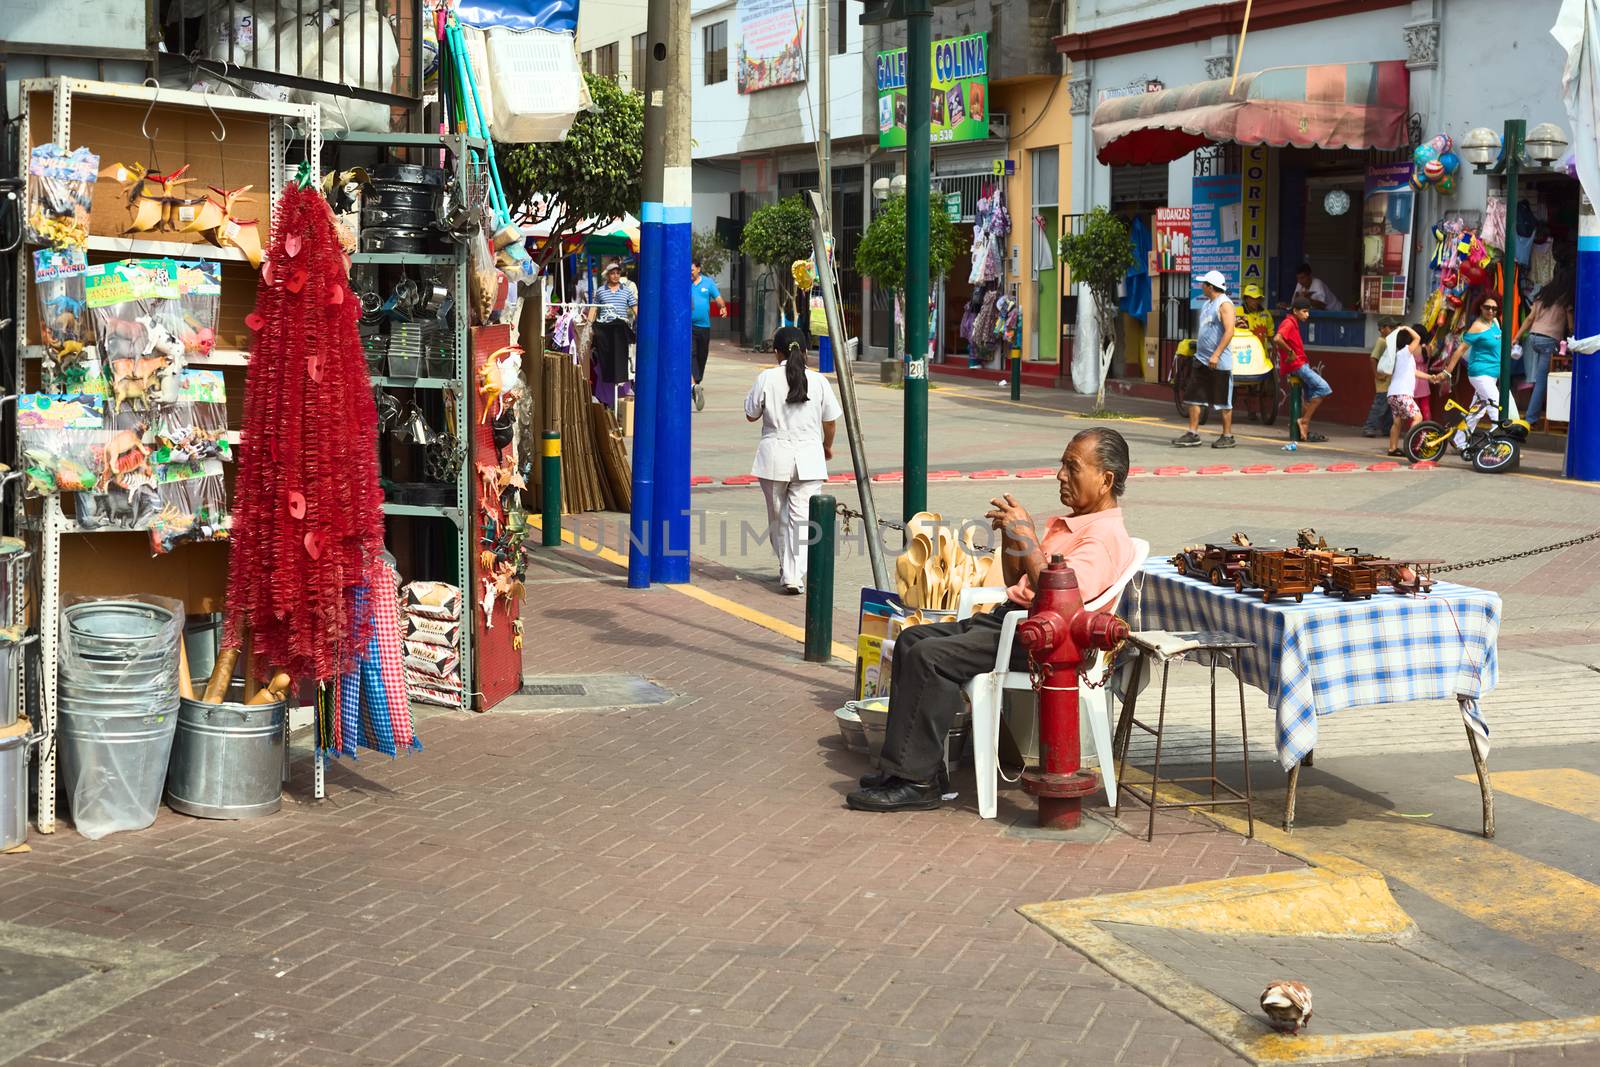 LIMA, PERU - FEBRUARY 13, 2012: Unidentified man selling kitchen utensils and wooden toys at the entrance of the market called Mercado No 1 de Surquillo on February 13, 2012 in Lima, Peru.